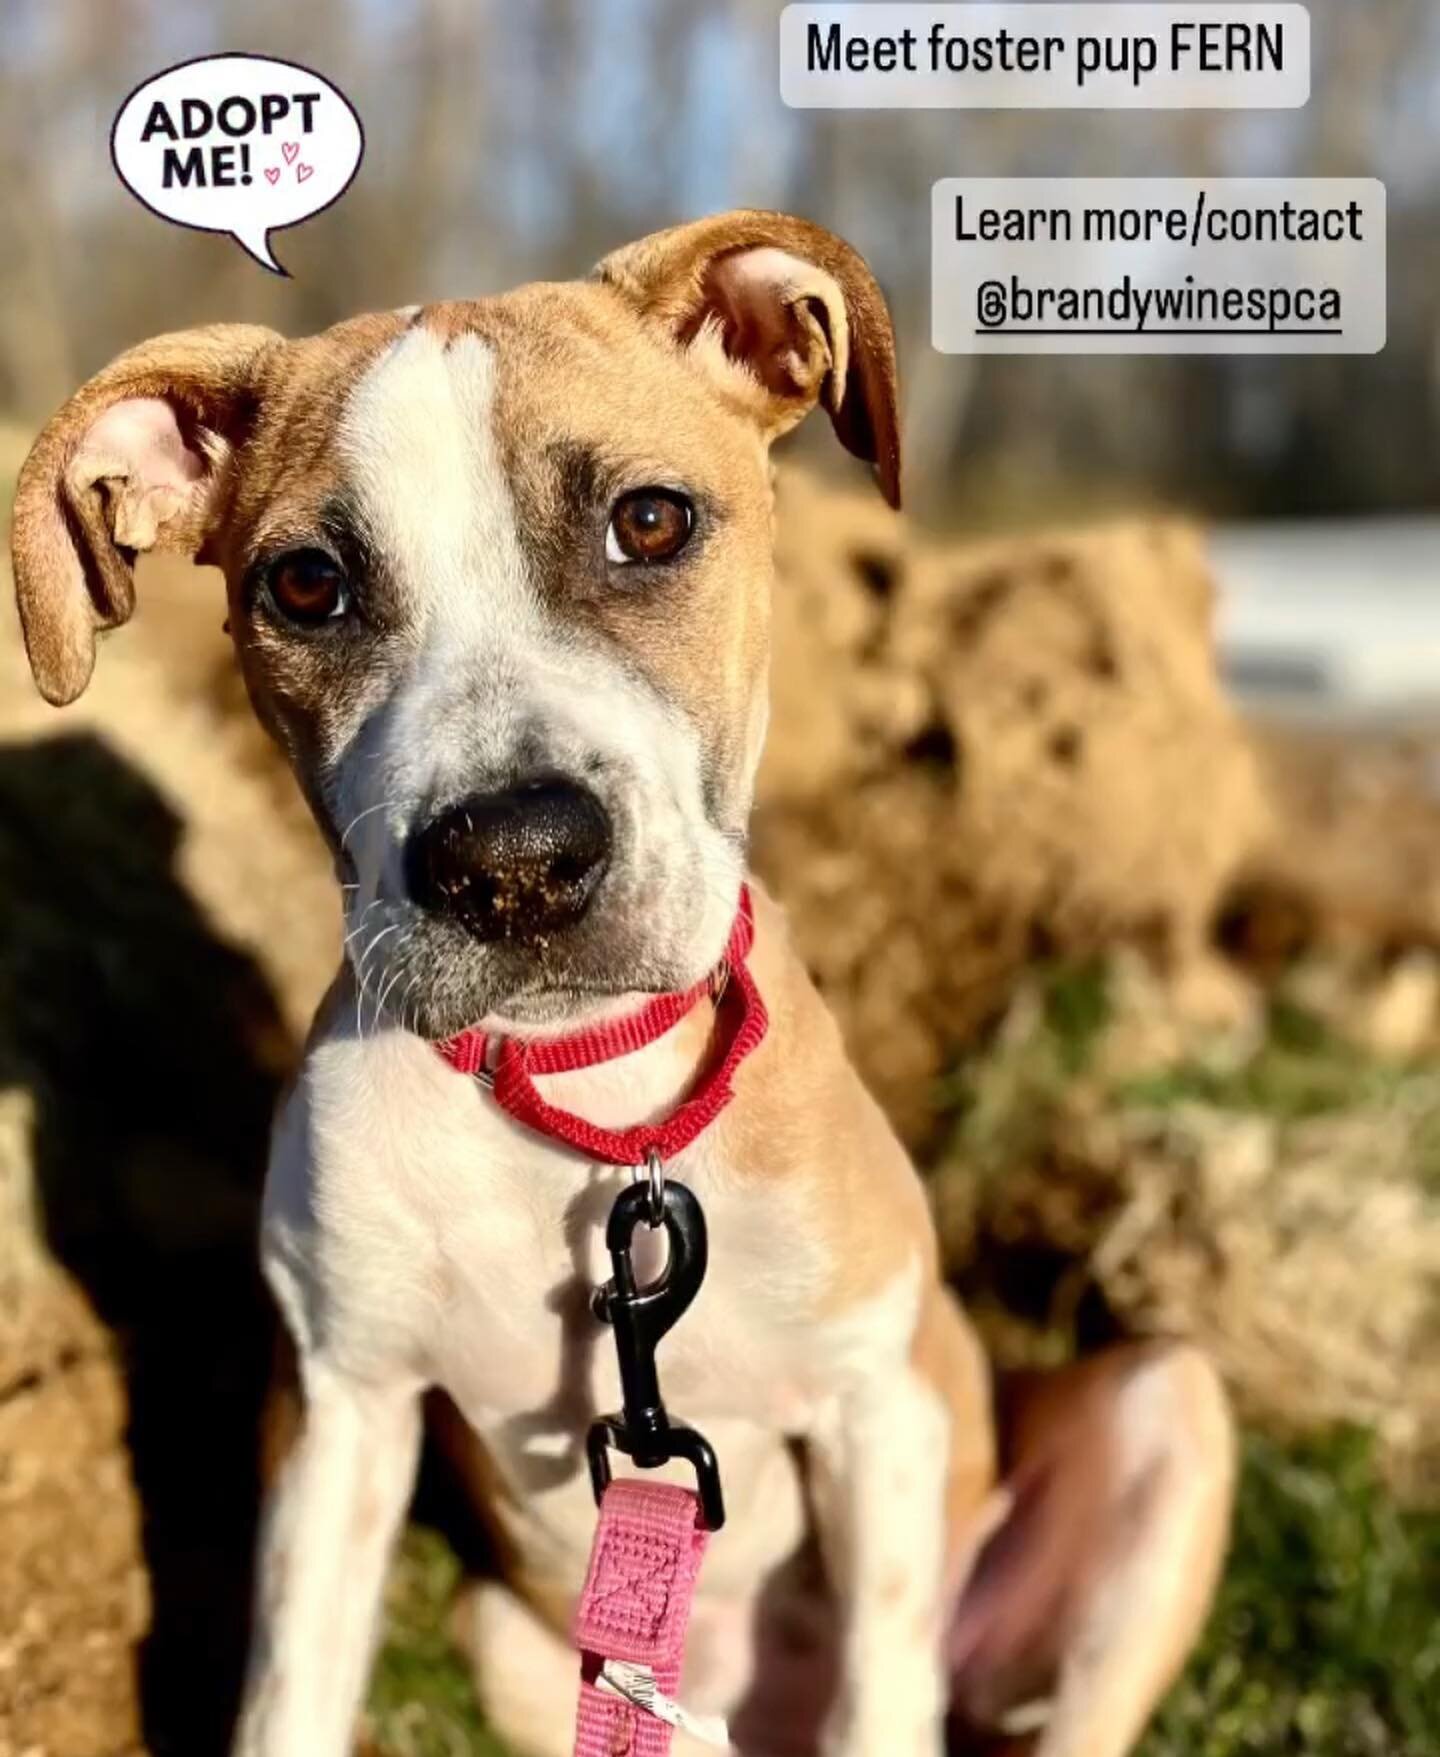 🐾 Ya&rsquo;ll, meet our short-term foster pup, Fern.

🐾 Don&rsquo;t walk, RUN to West Chester, Pa and setup a meet n&rsquo; greet with @brandywinespca 

🐾 I&rsquo;ll post more on this sweet, lil&rsquo; 5 mo old bundle of silliness, loyalty, and pe